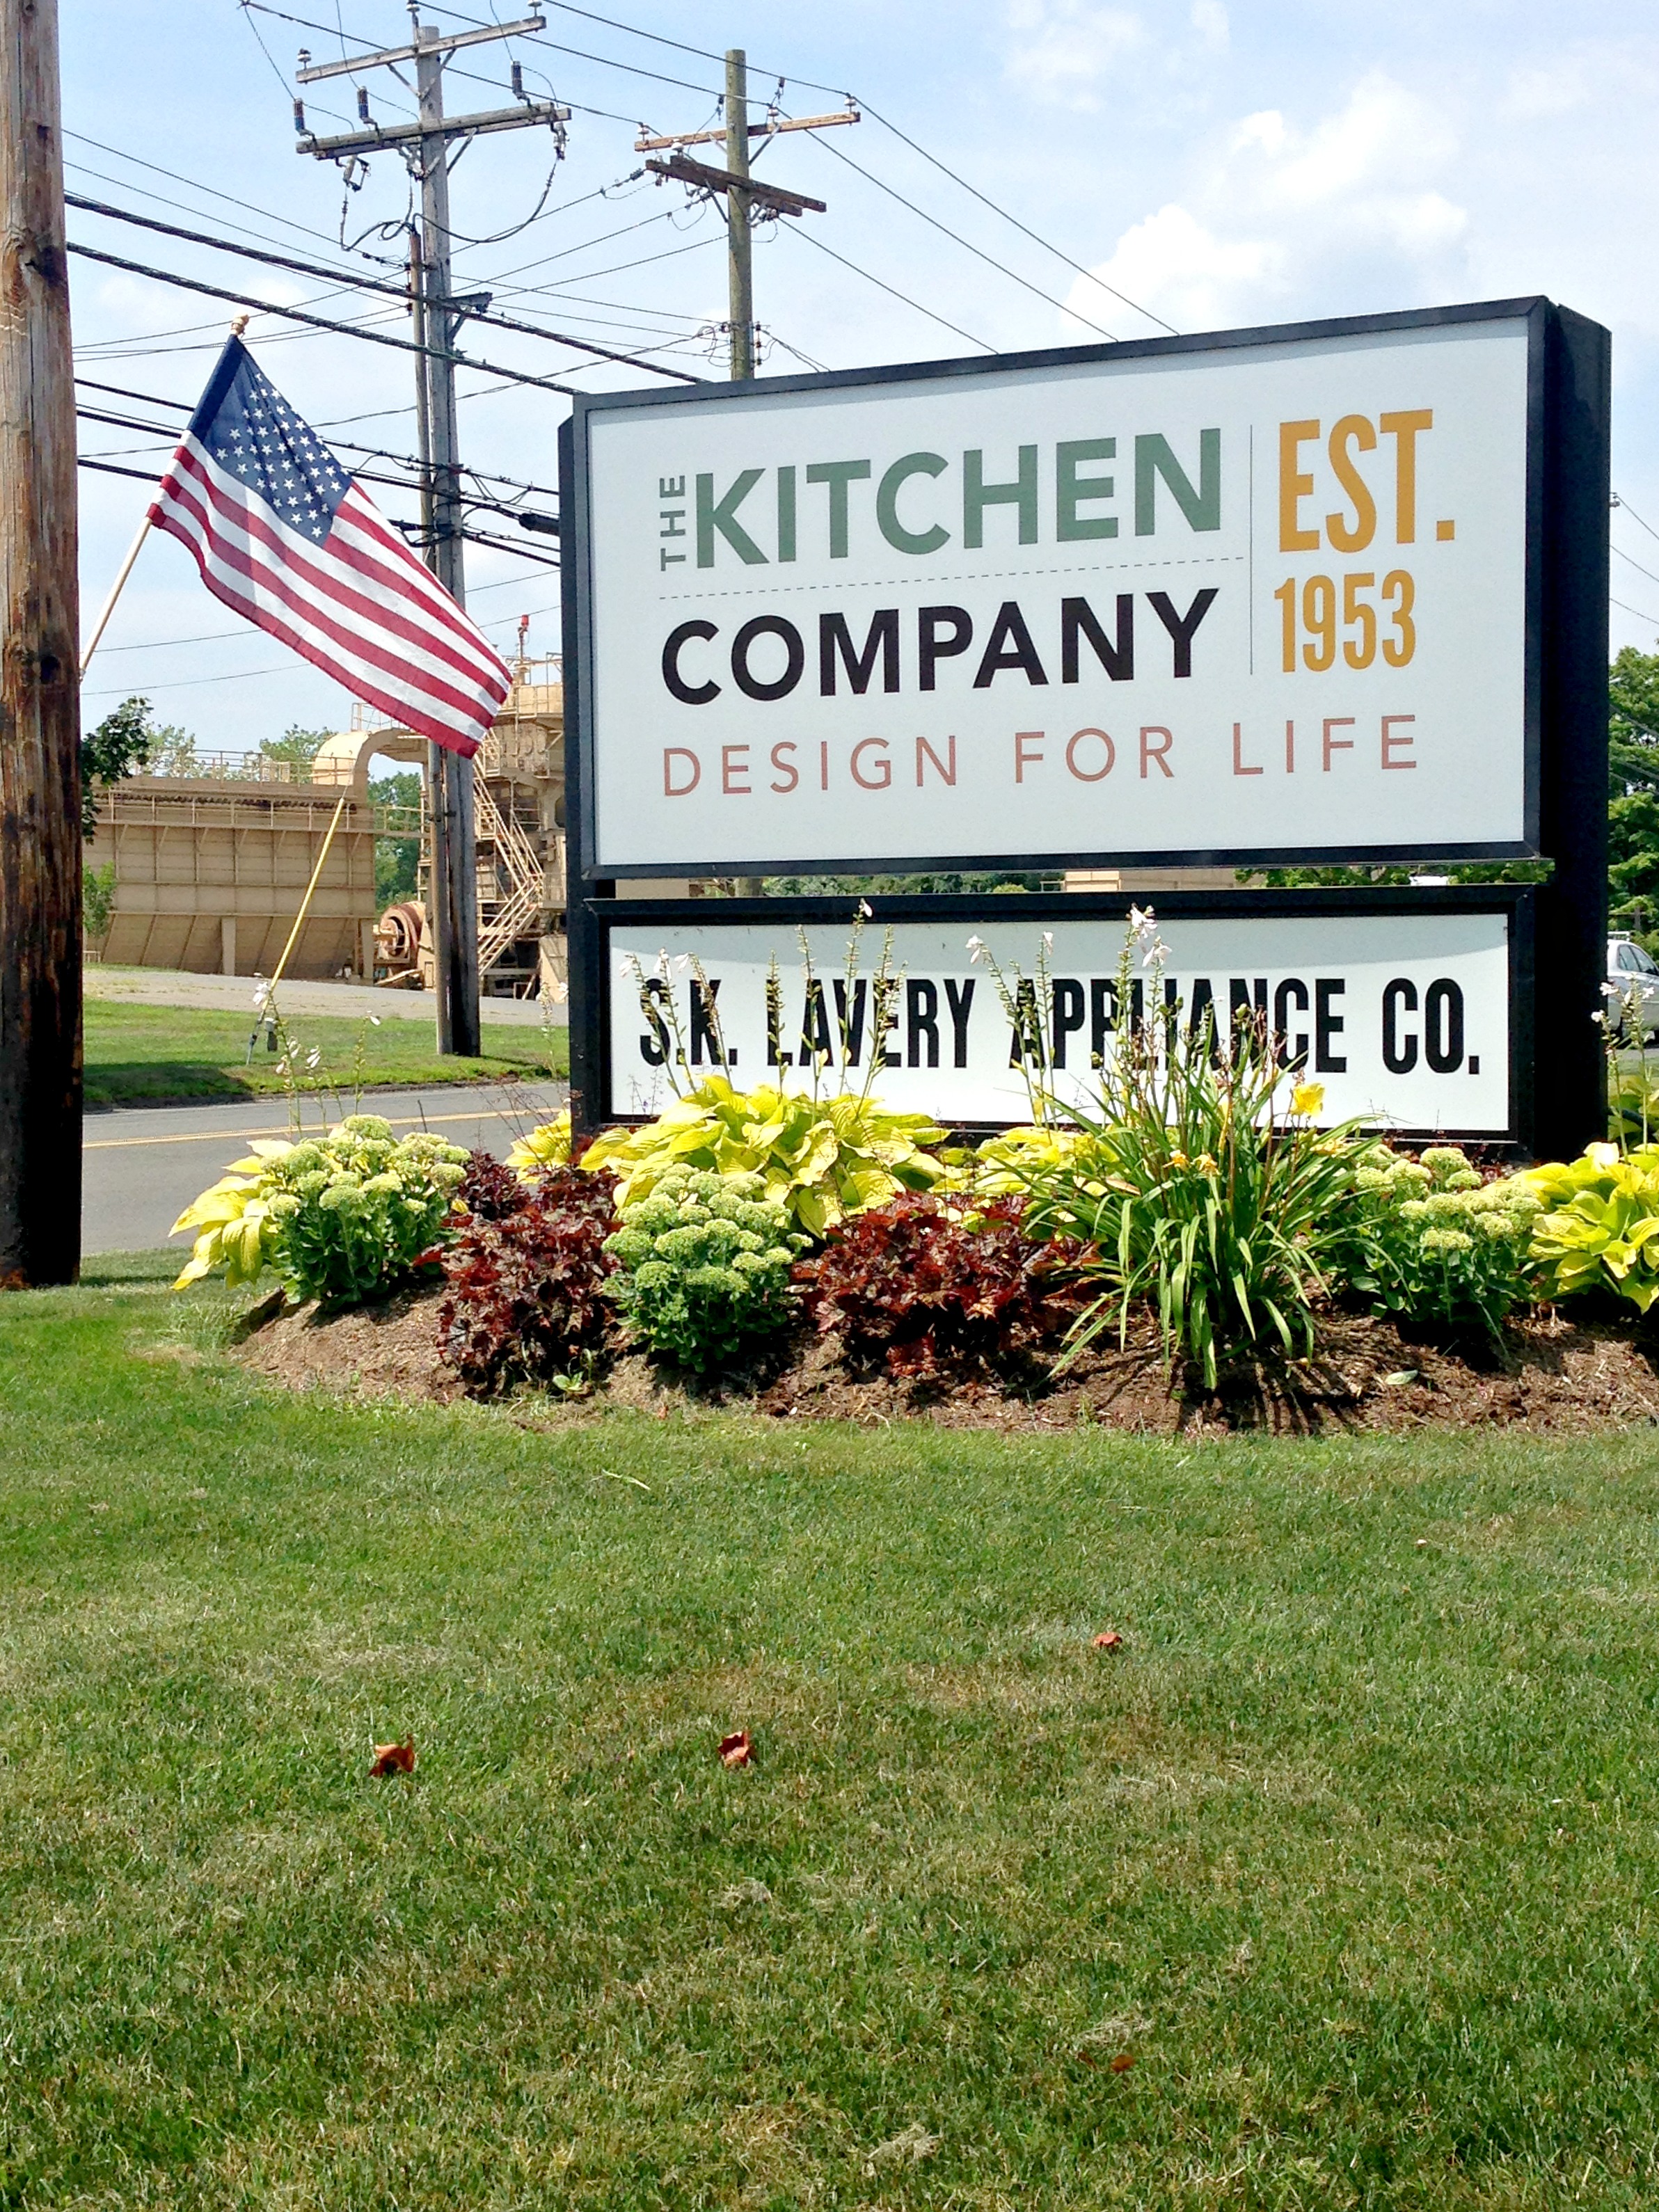 The kitchen company sign